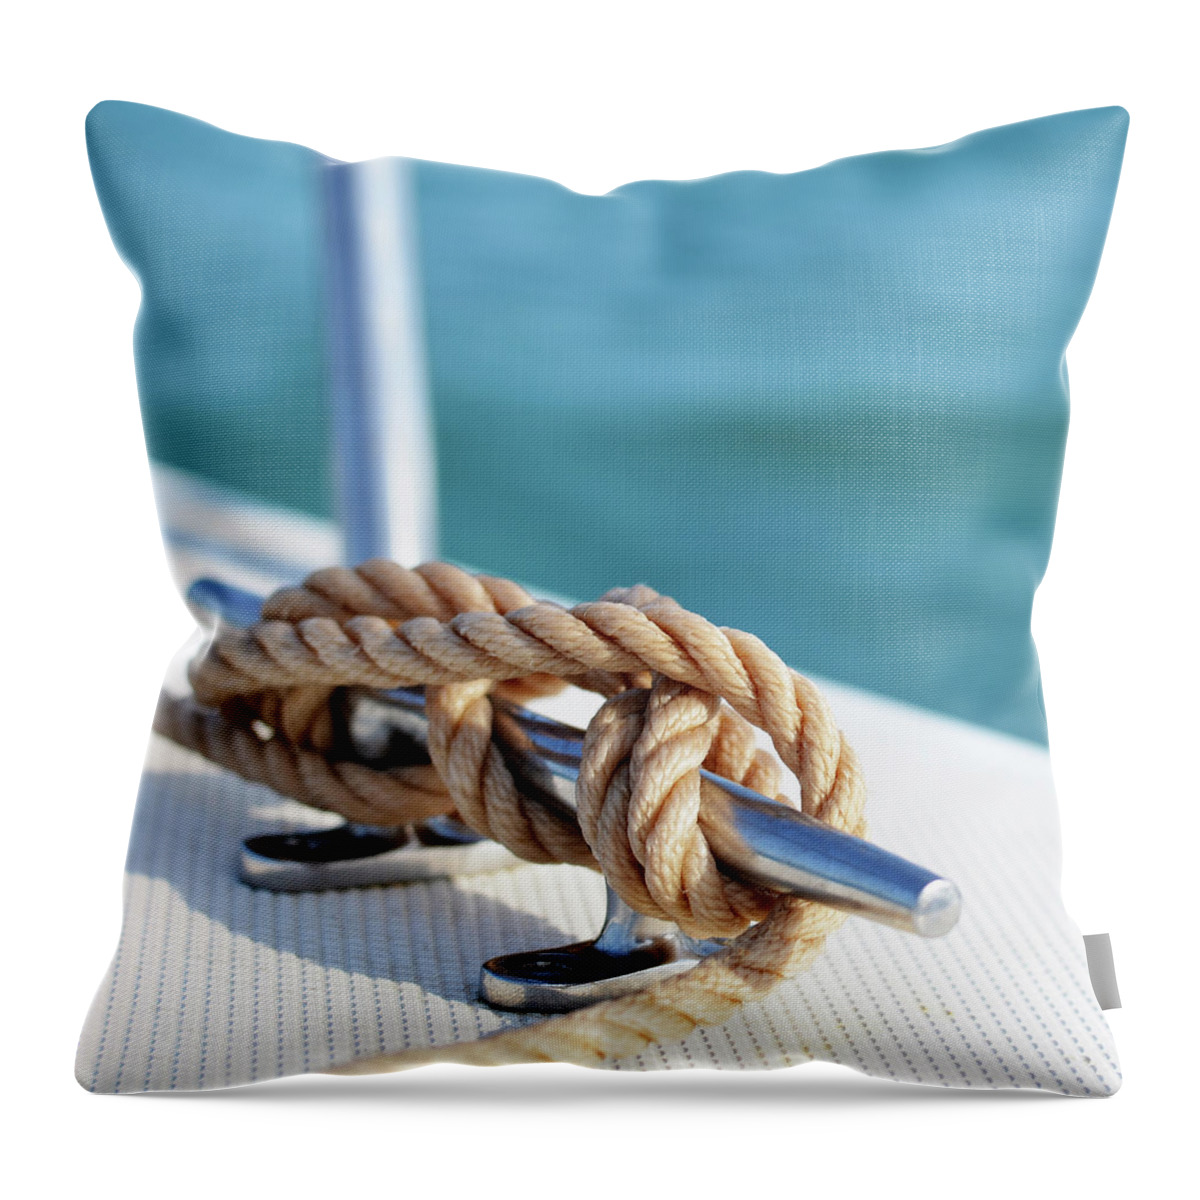 Sailors Knot Throw Pillow featuring the photograph Sailor's Knot Square #1 by Laura Fasulo